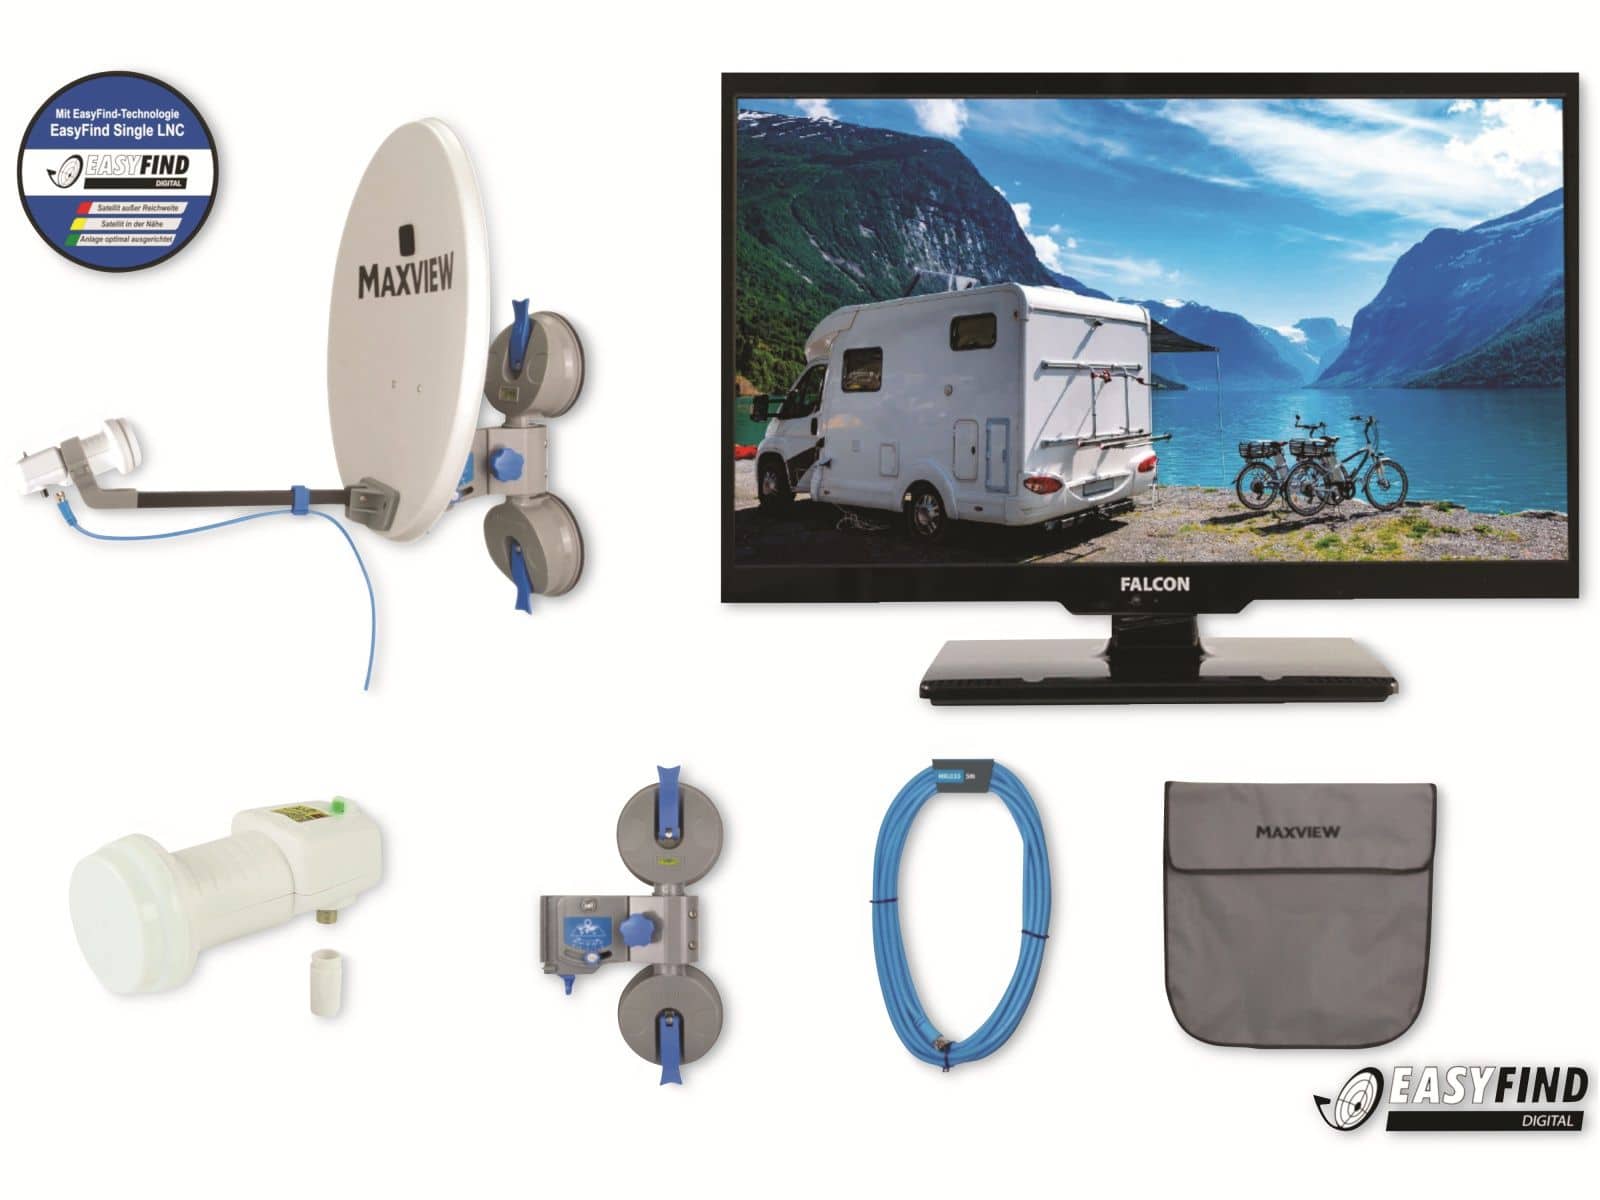 FALCON Easyfind TV Camping Set Maxview Pro, inkl. LED-TV 61 cm (24") von Falcon